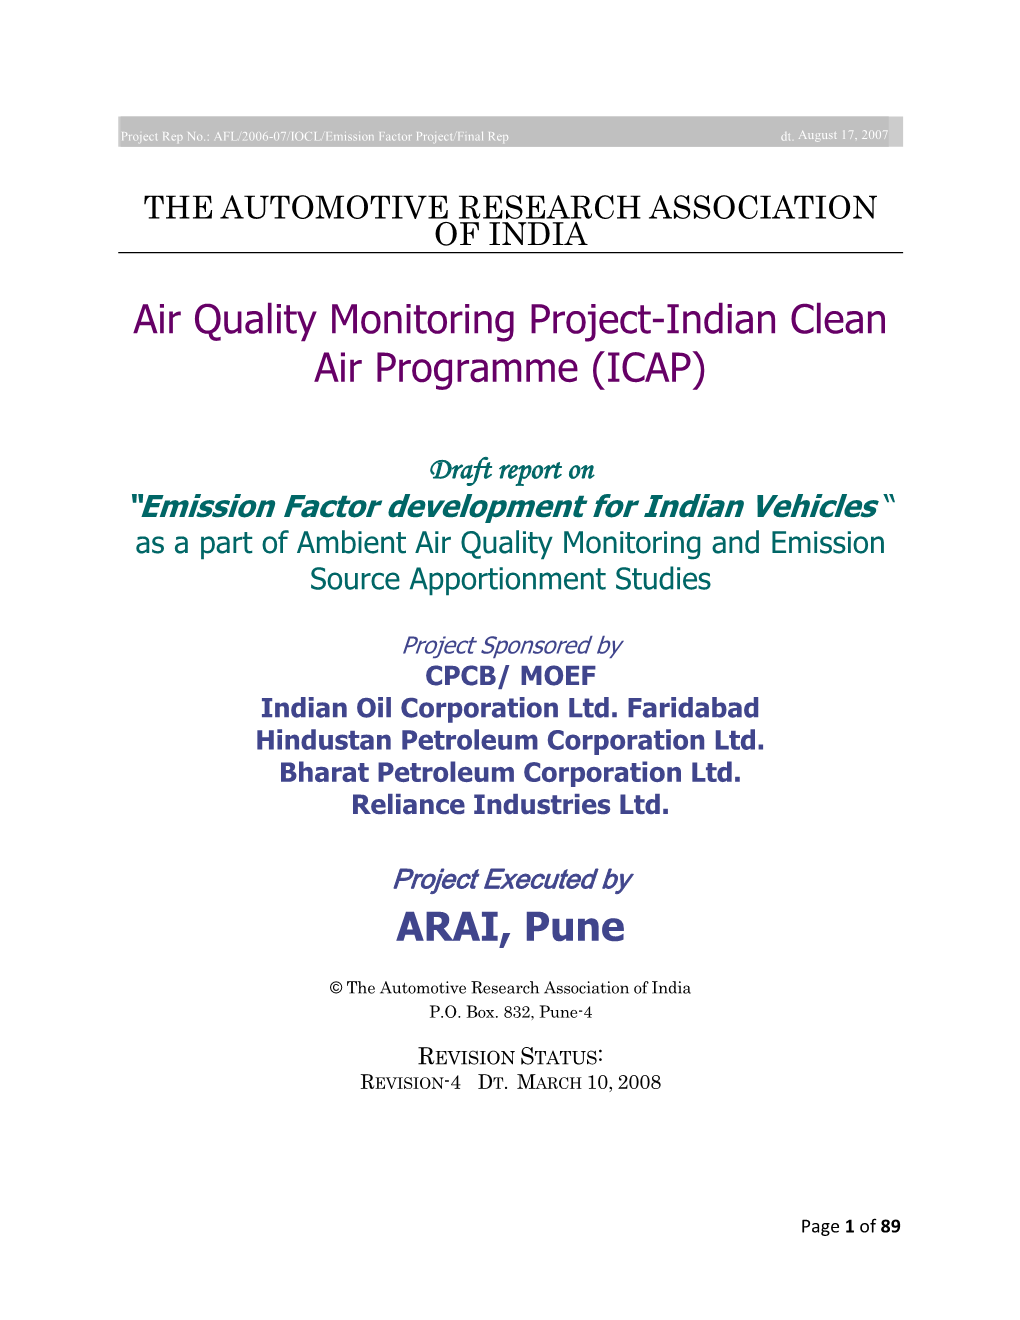 Report on Emission Factor Development for Indian Vehicles